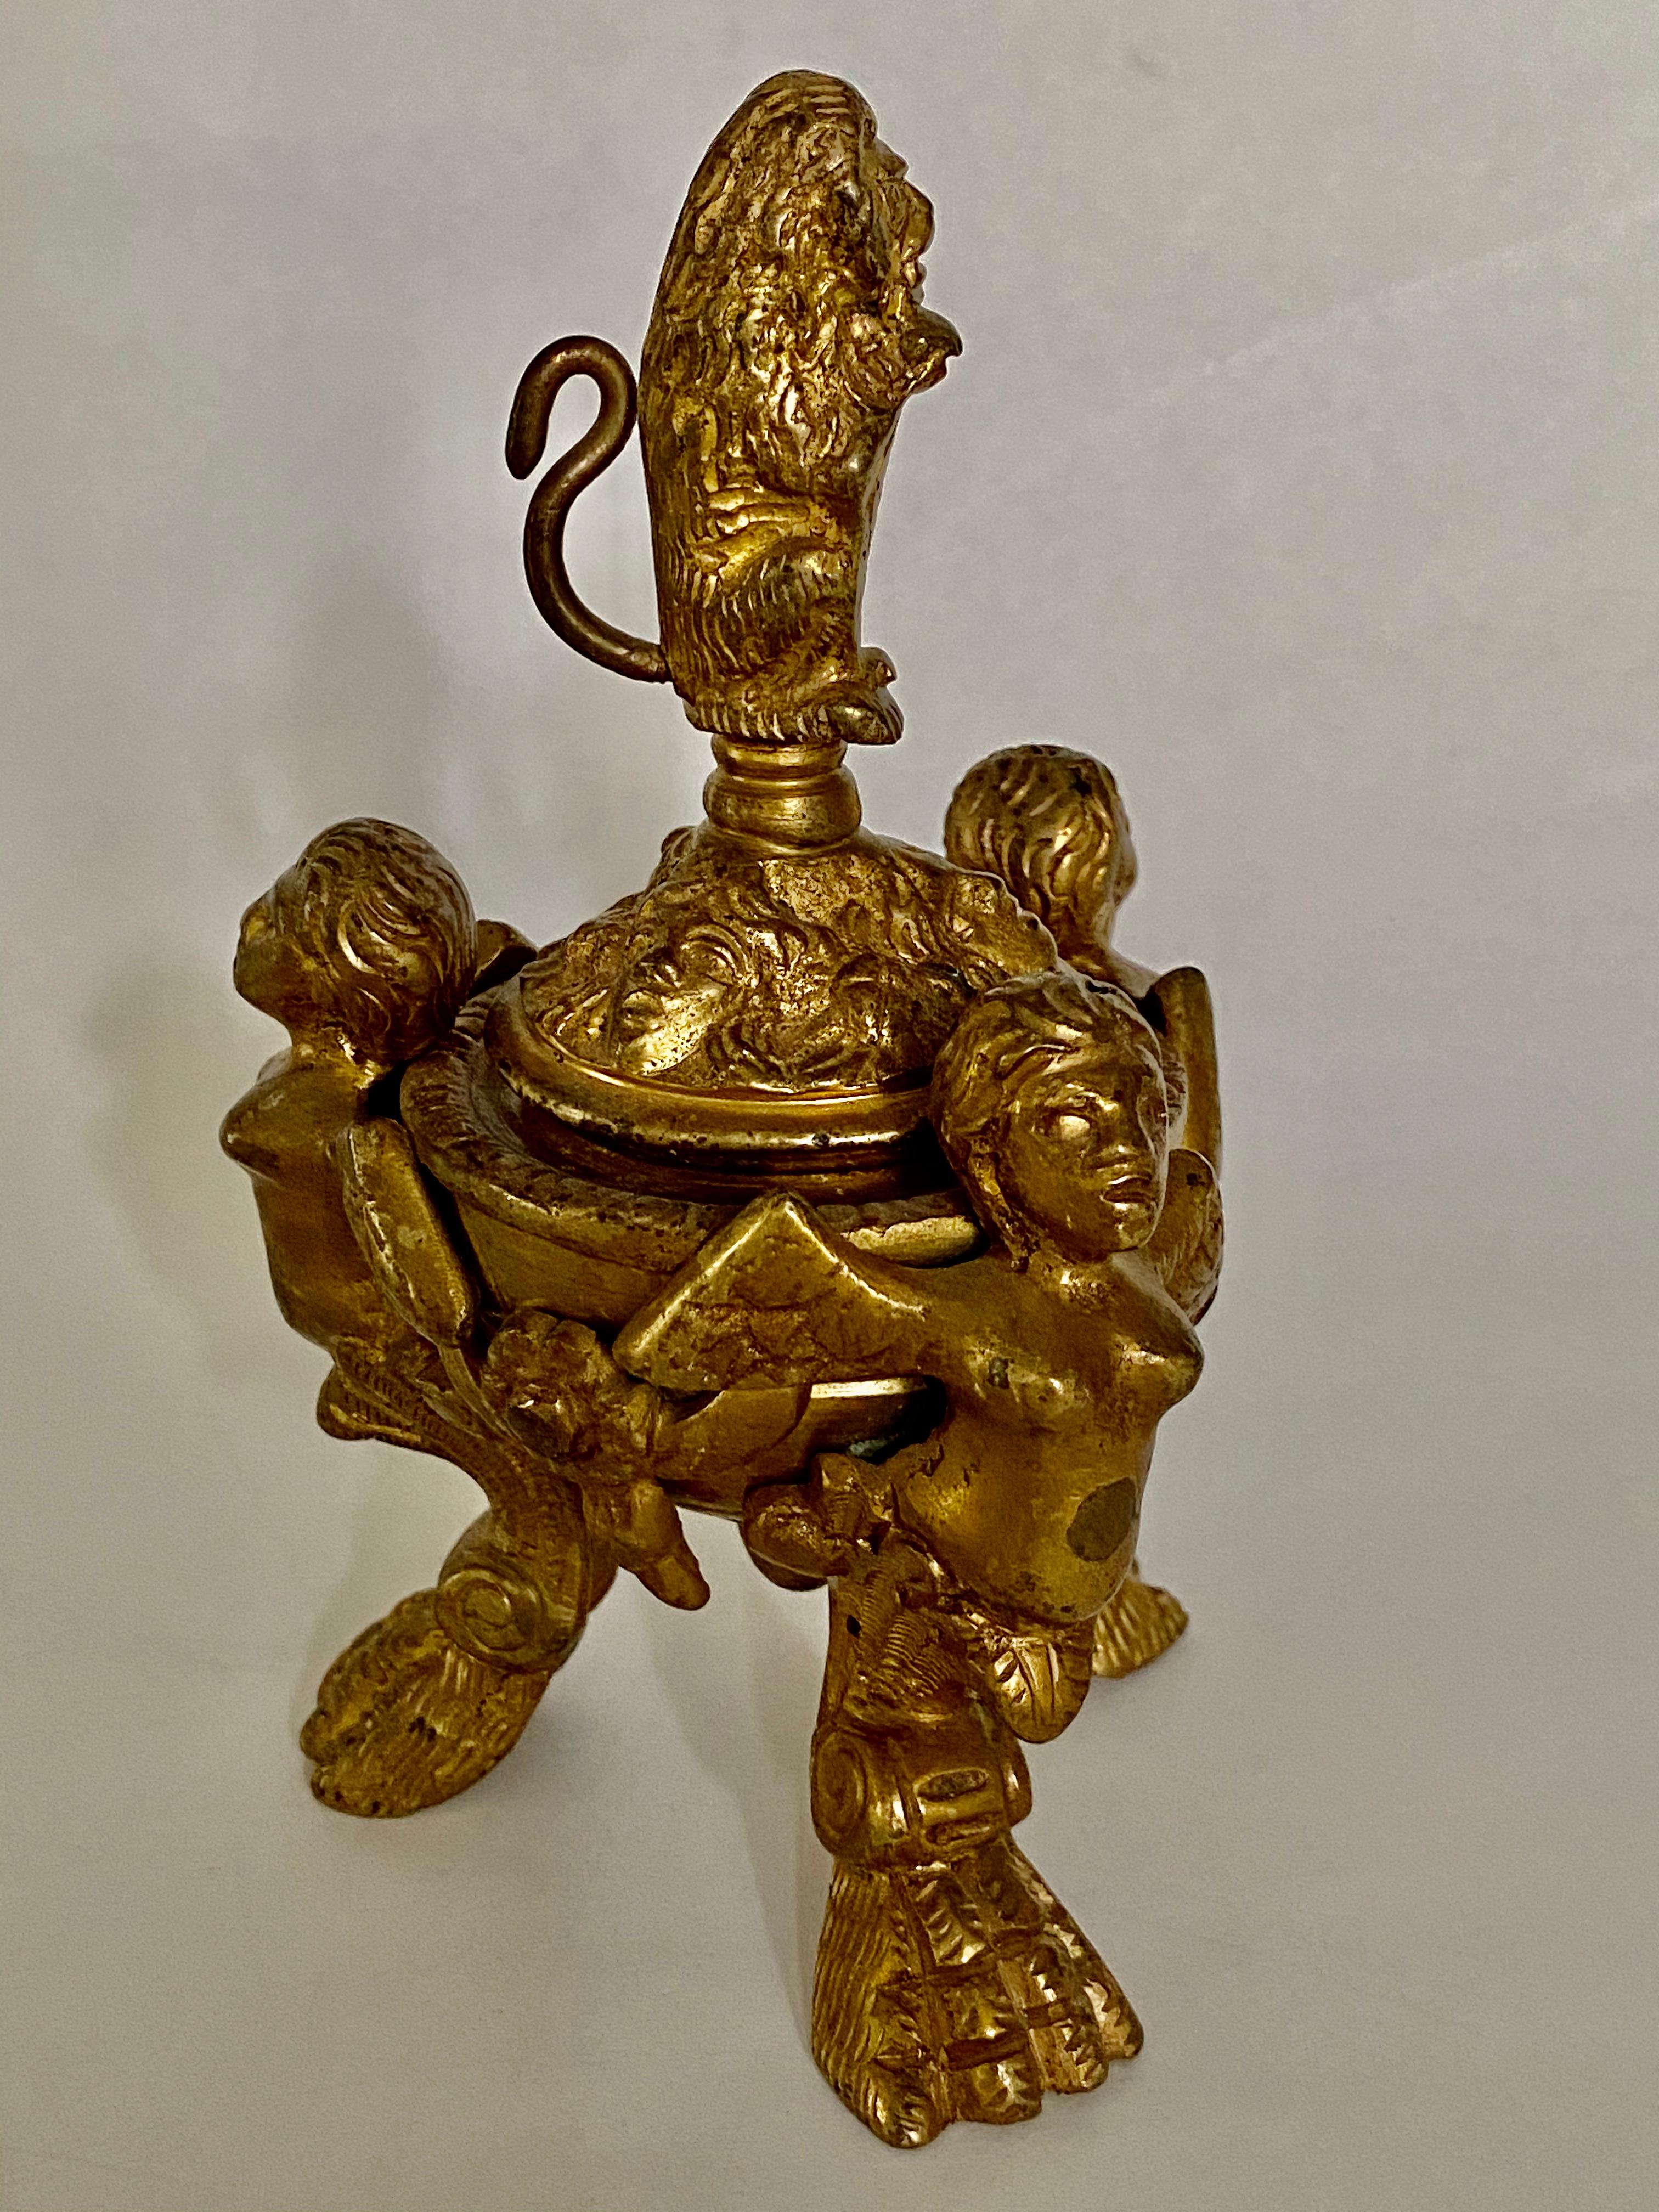 After a 16th century Venetian design, winged putti with taloned legs support a turned bronze inkwell covered with a lid decorated with masks and garlands, surmounted by a lion holding a shield.